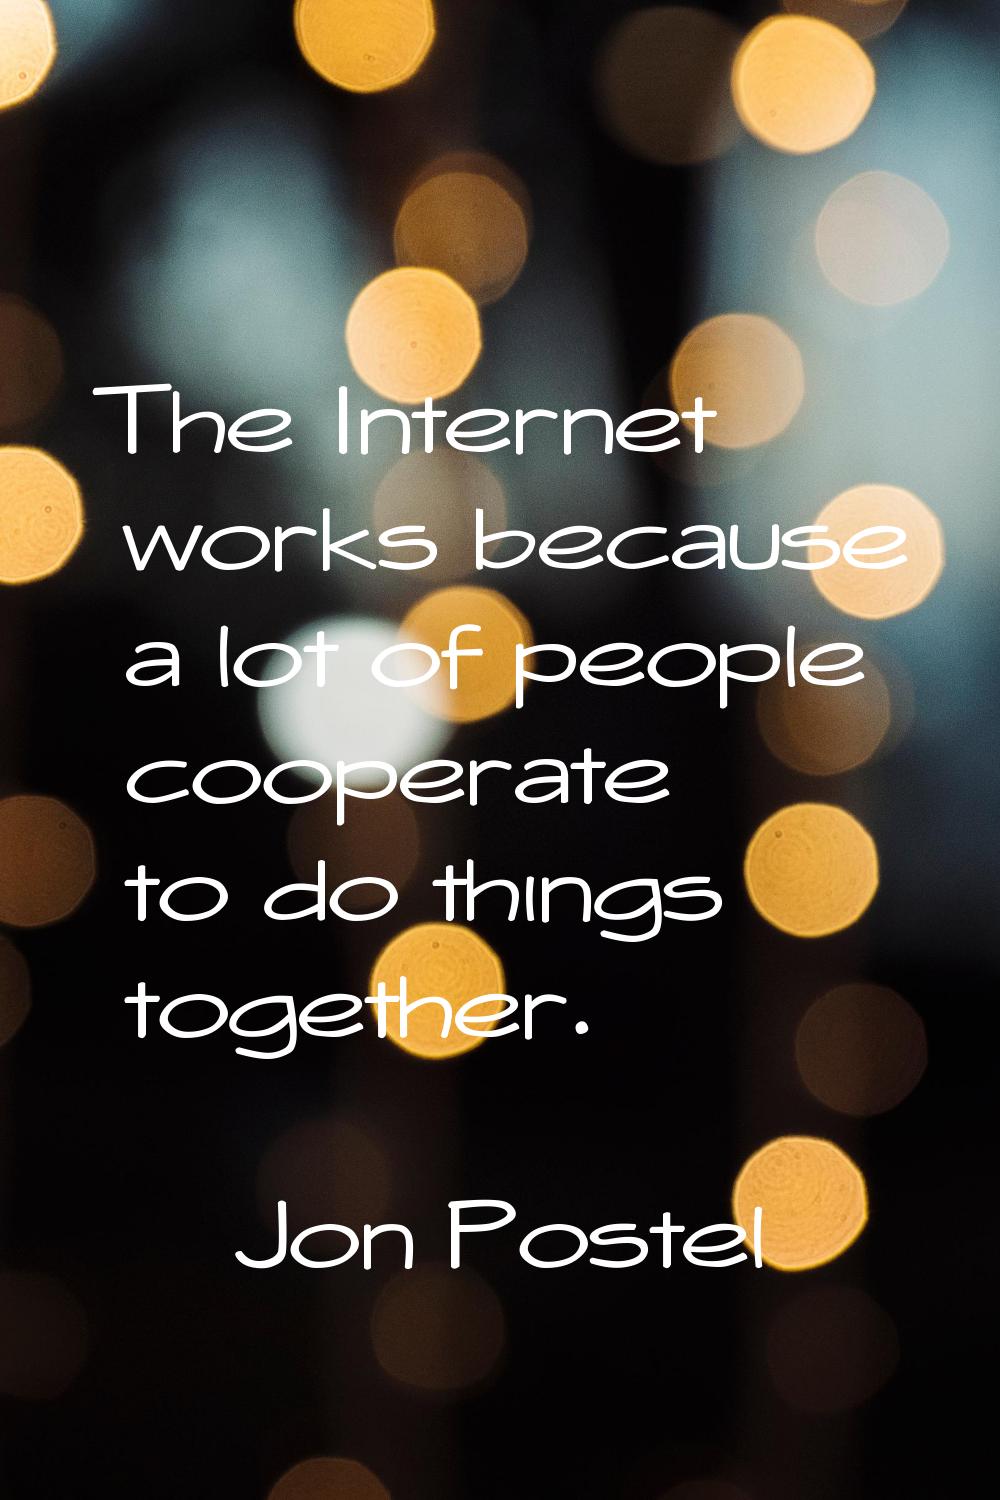 The Internet works because a lot of people cooperate to do things together.